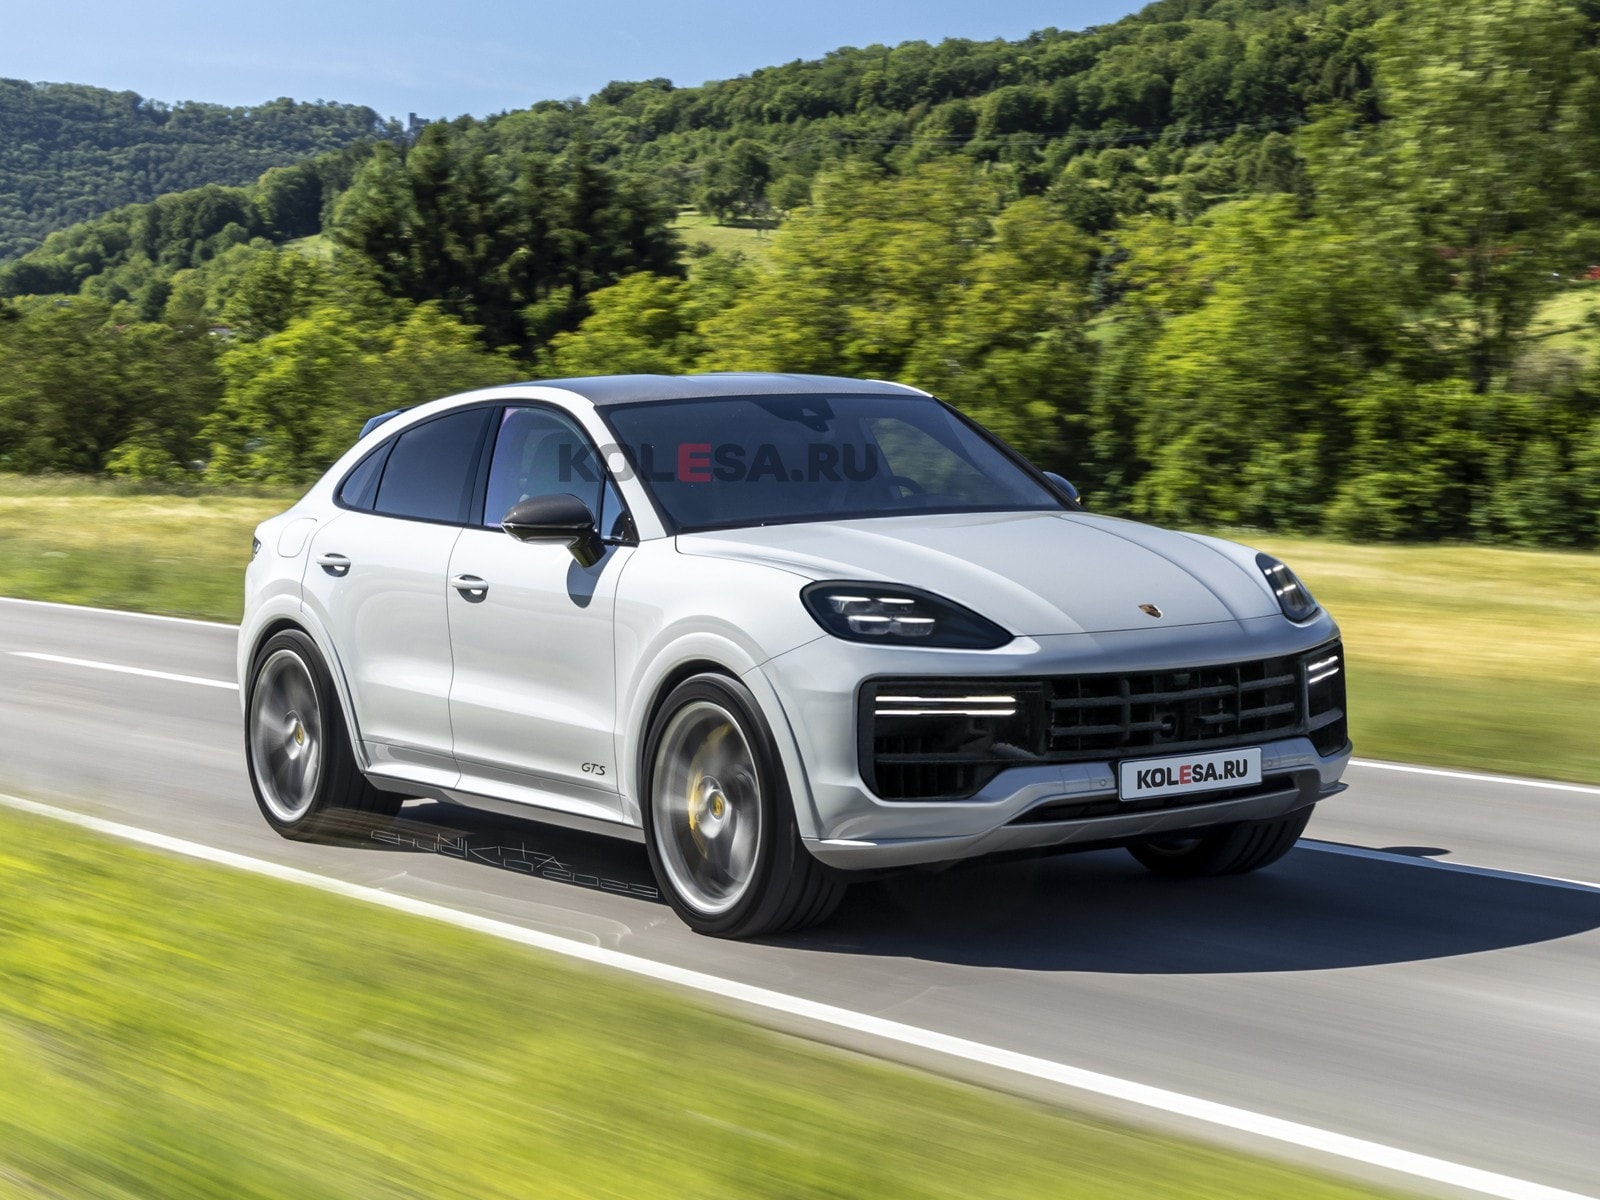 https://s1.cdn.autoevolution.com/images/news/porsche-cayenne-coupe-gets-a-virtual-facelift-dares-you-to-spot-the-changes-208577_1.jpg